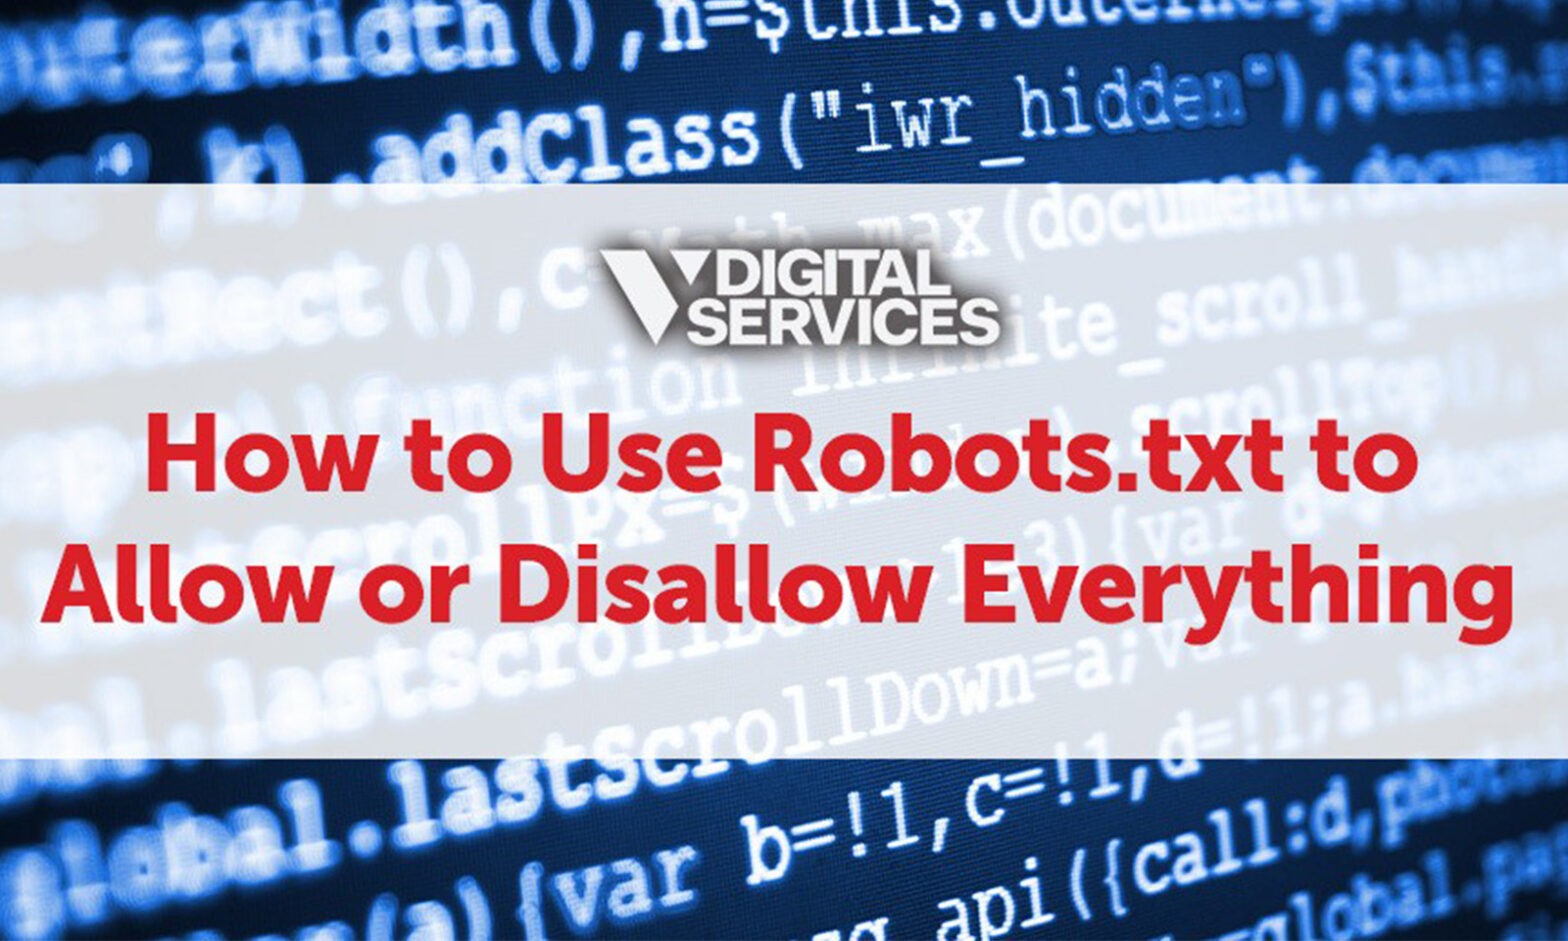 Featured image for post: How to Use Robots.txt to Allow or Disallow Everything